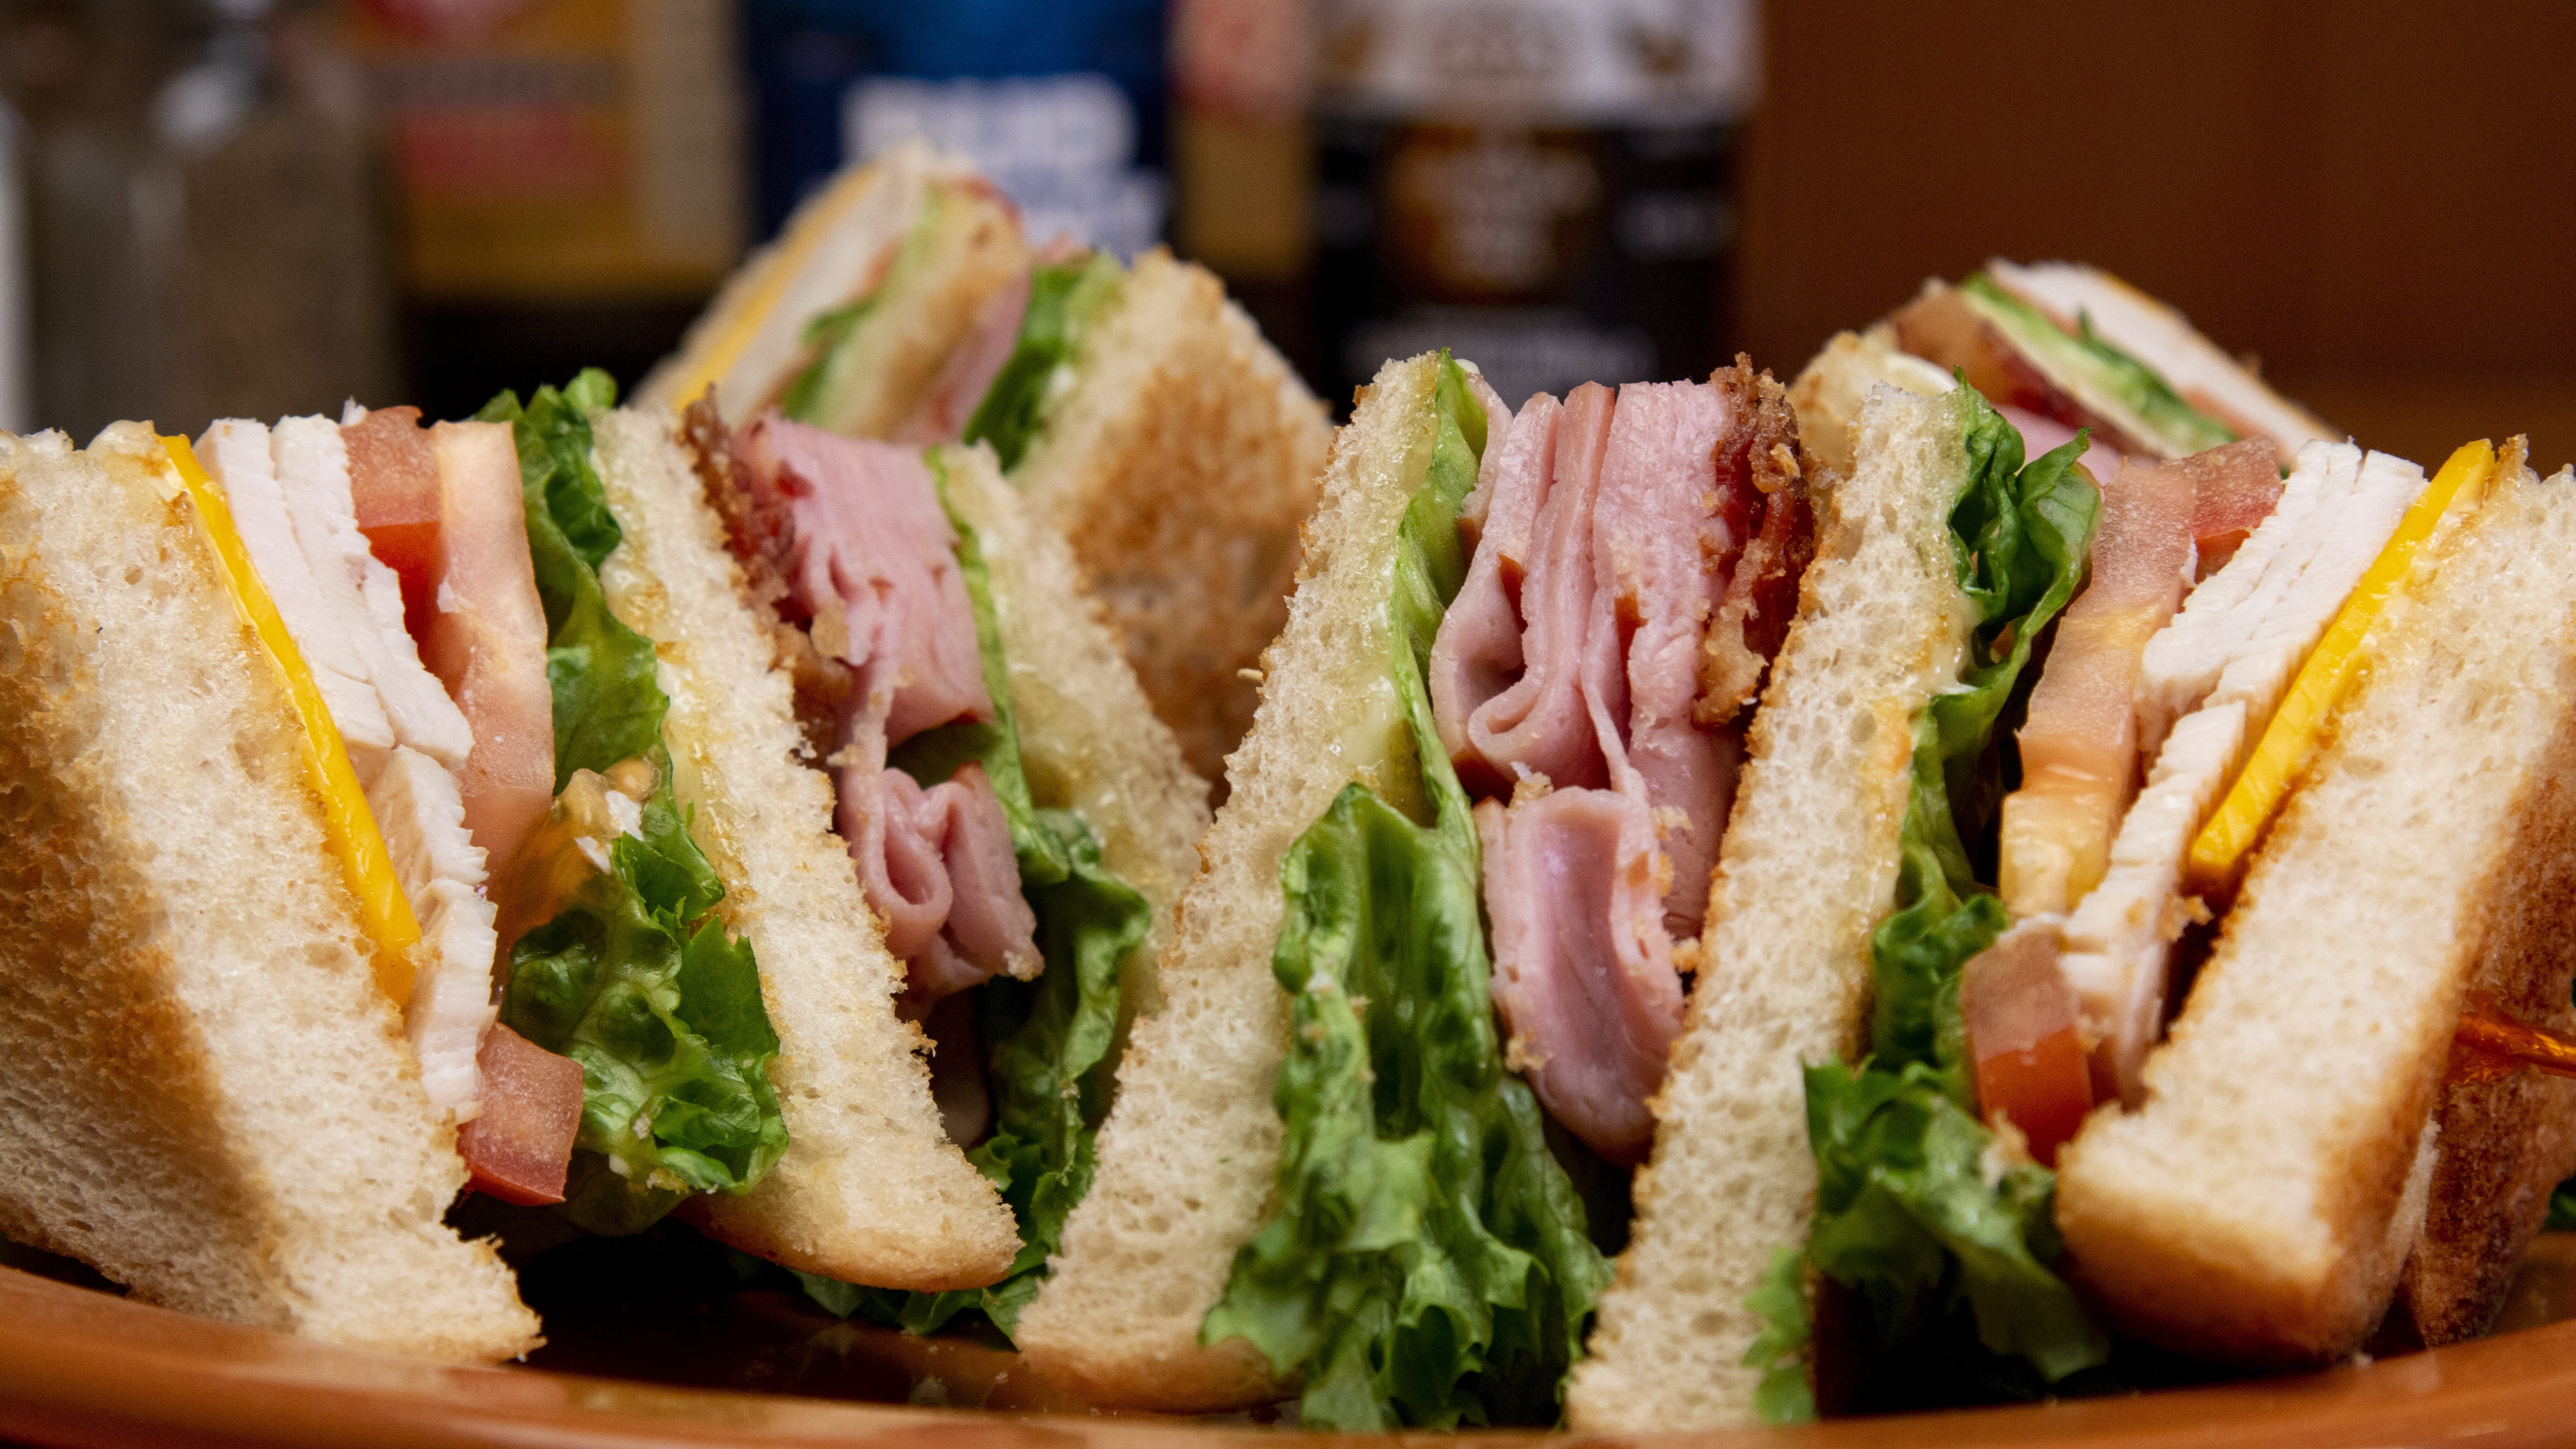 club sandwich, lunch, bread, delicious, food and drink, healthy eating